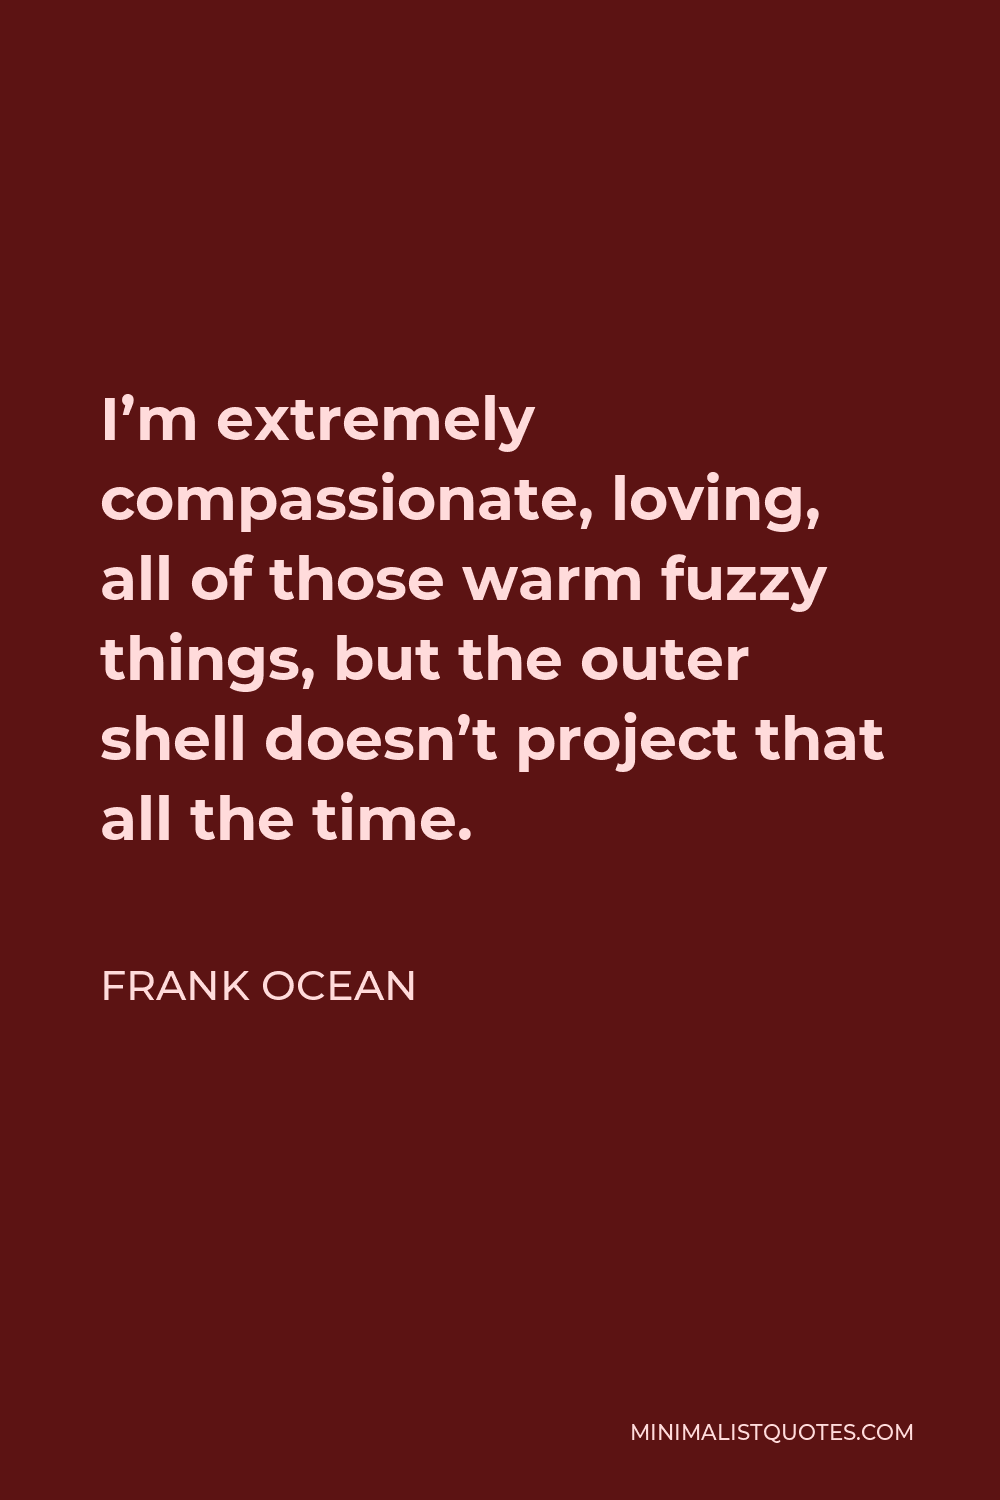 Frank Ocean Quote - I’m extremely compassionate, loving, all of those warm fuzzy things, but the outer shell doesn’t project that all the time.